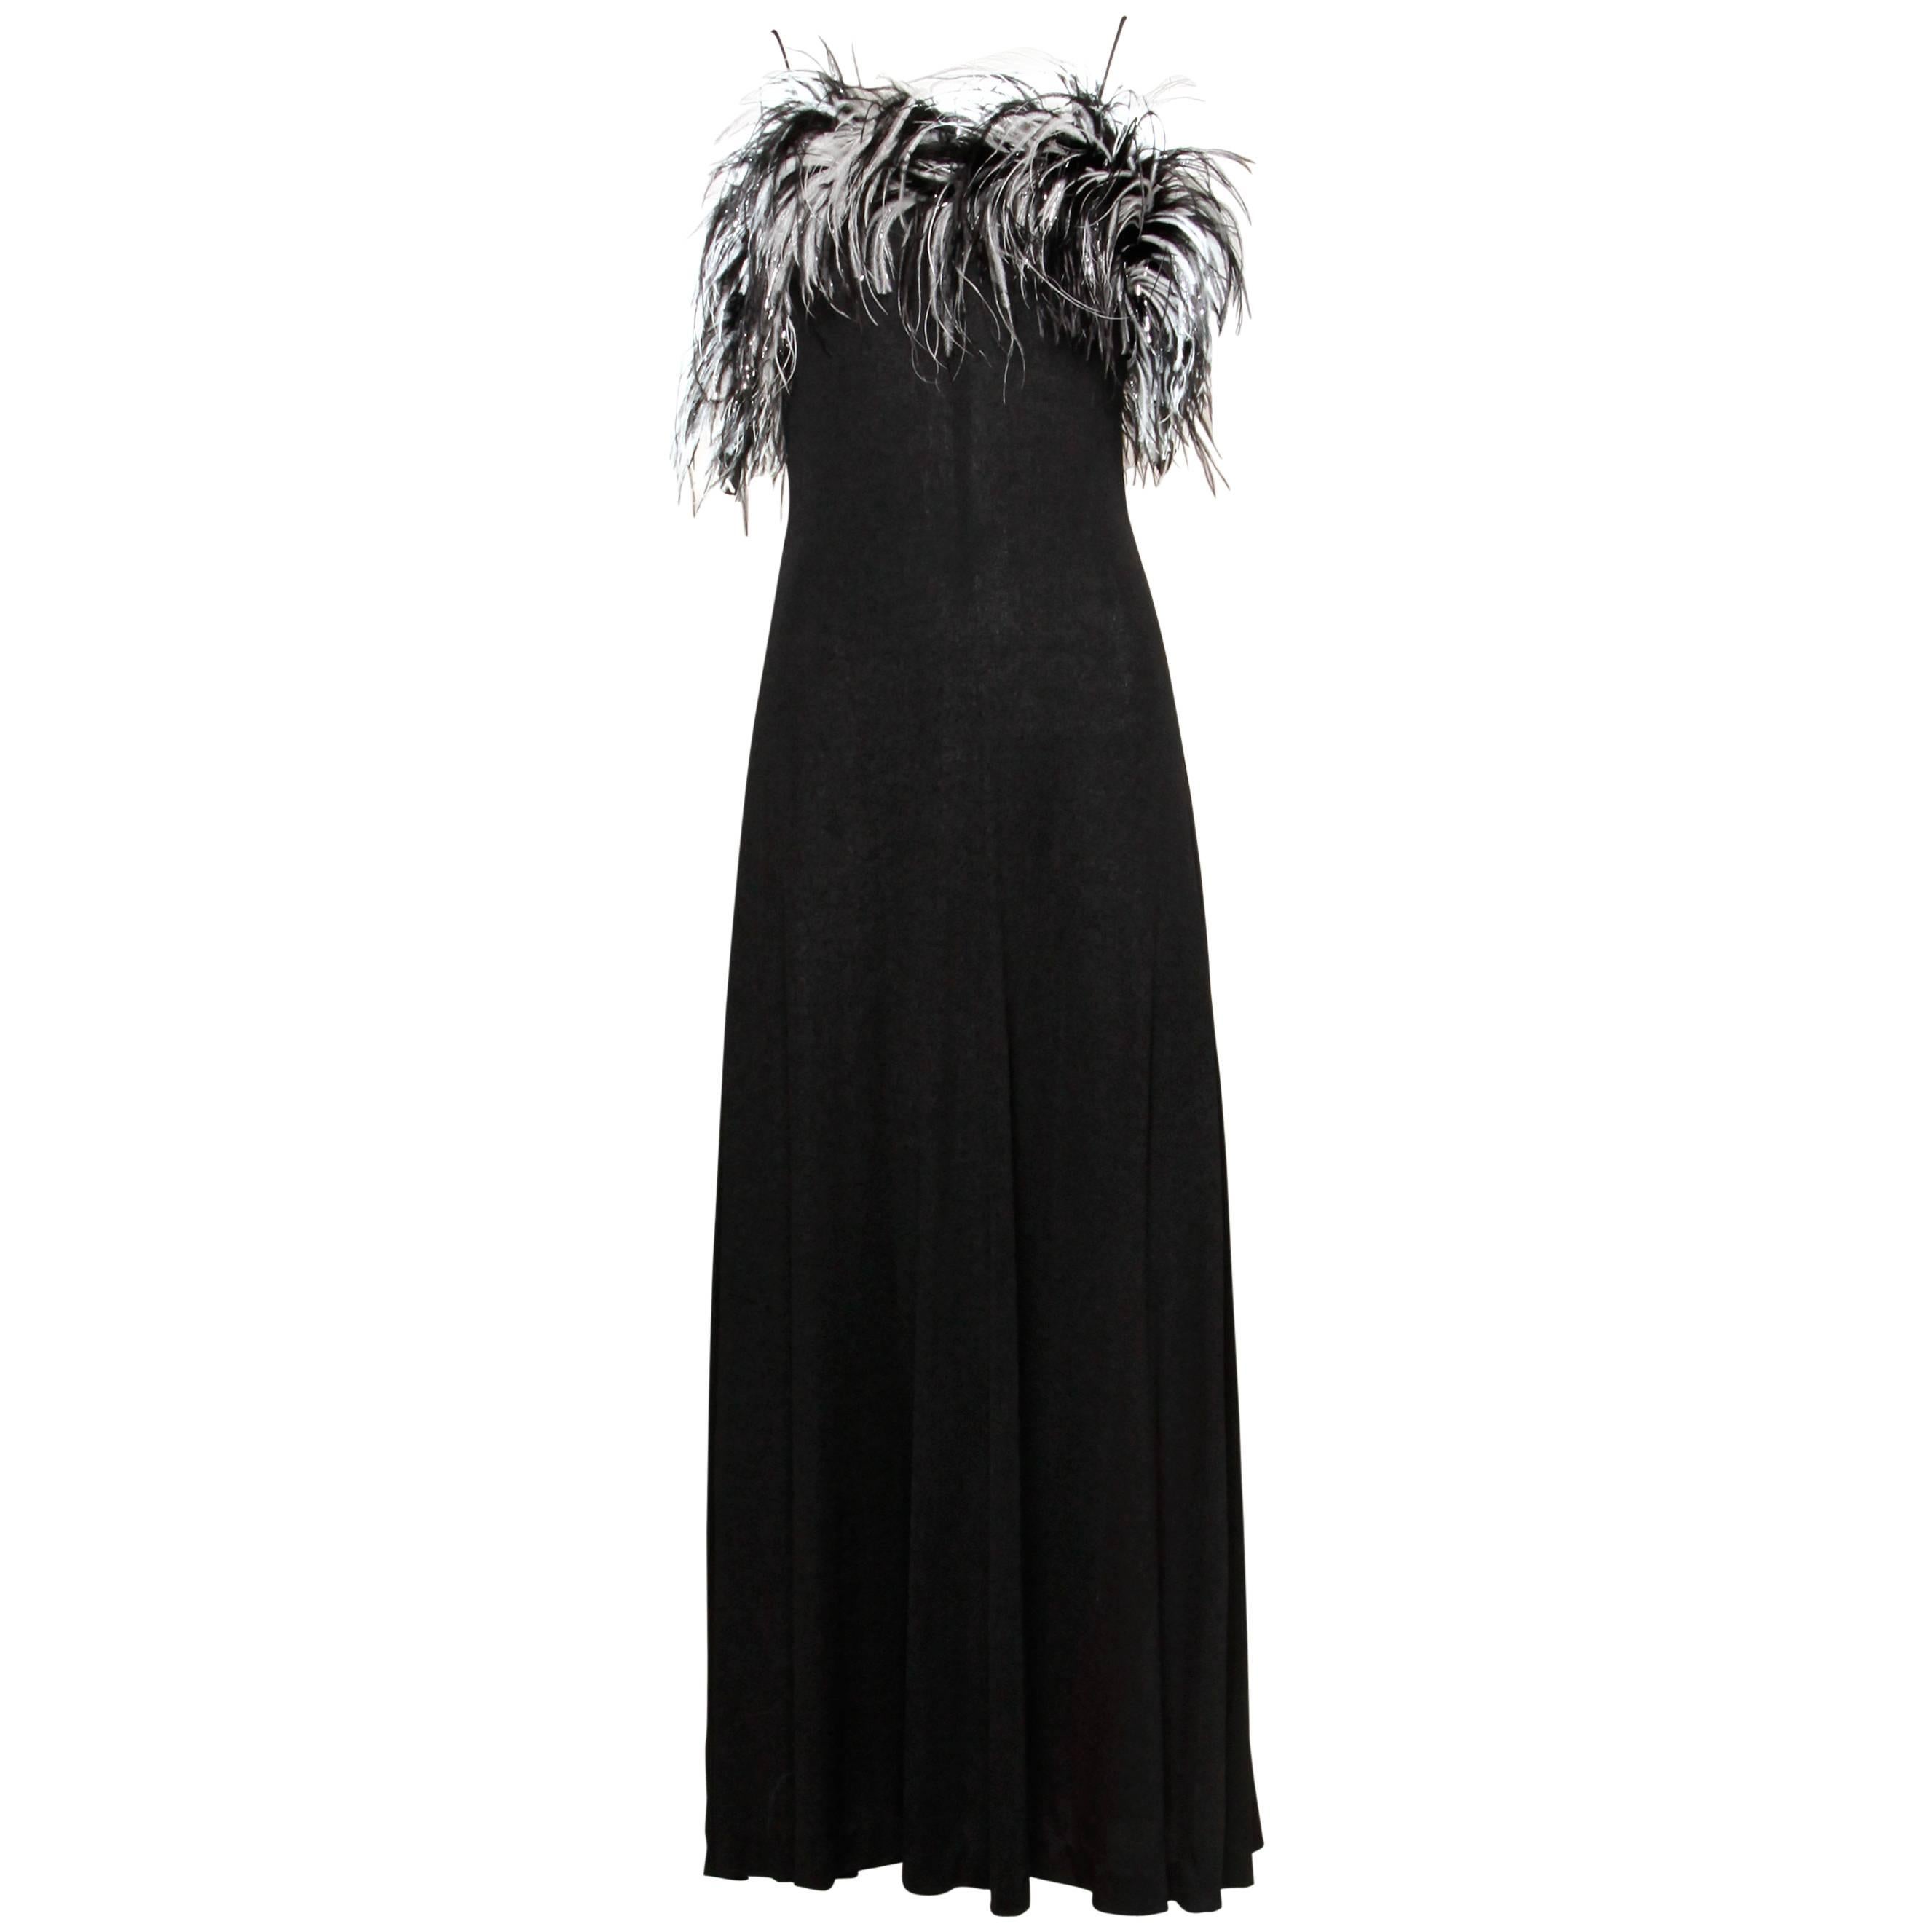 1970s Vintage Jersey Knit Maxi Dress with Metallic Ostrich Feathers